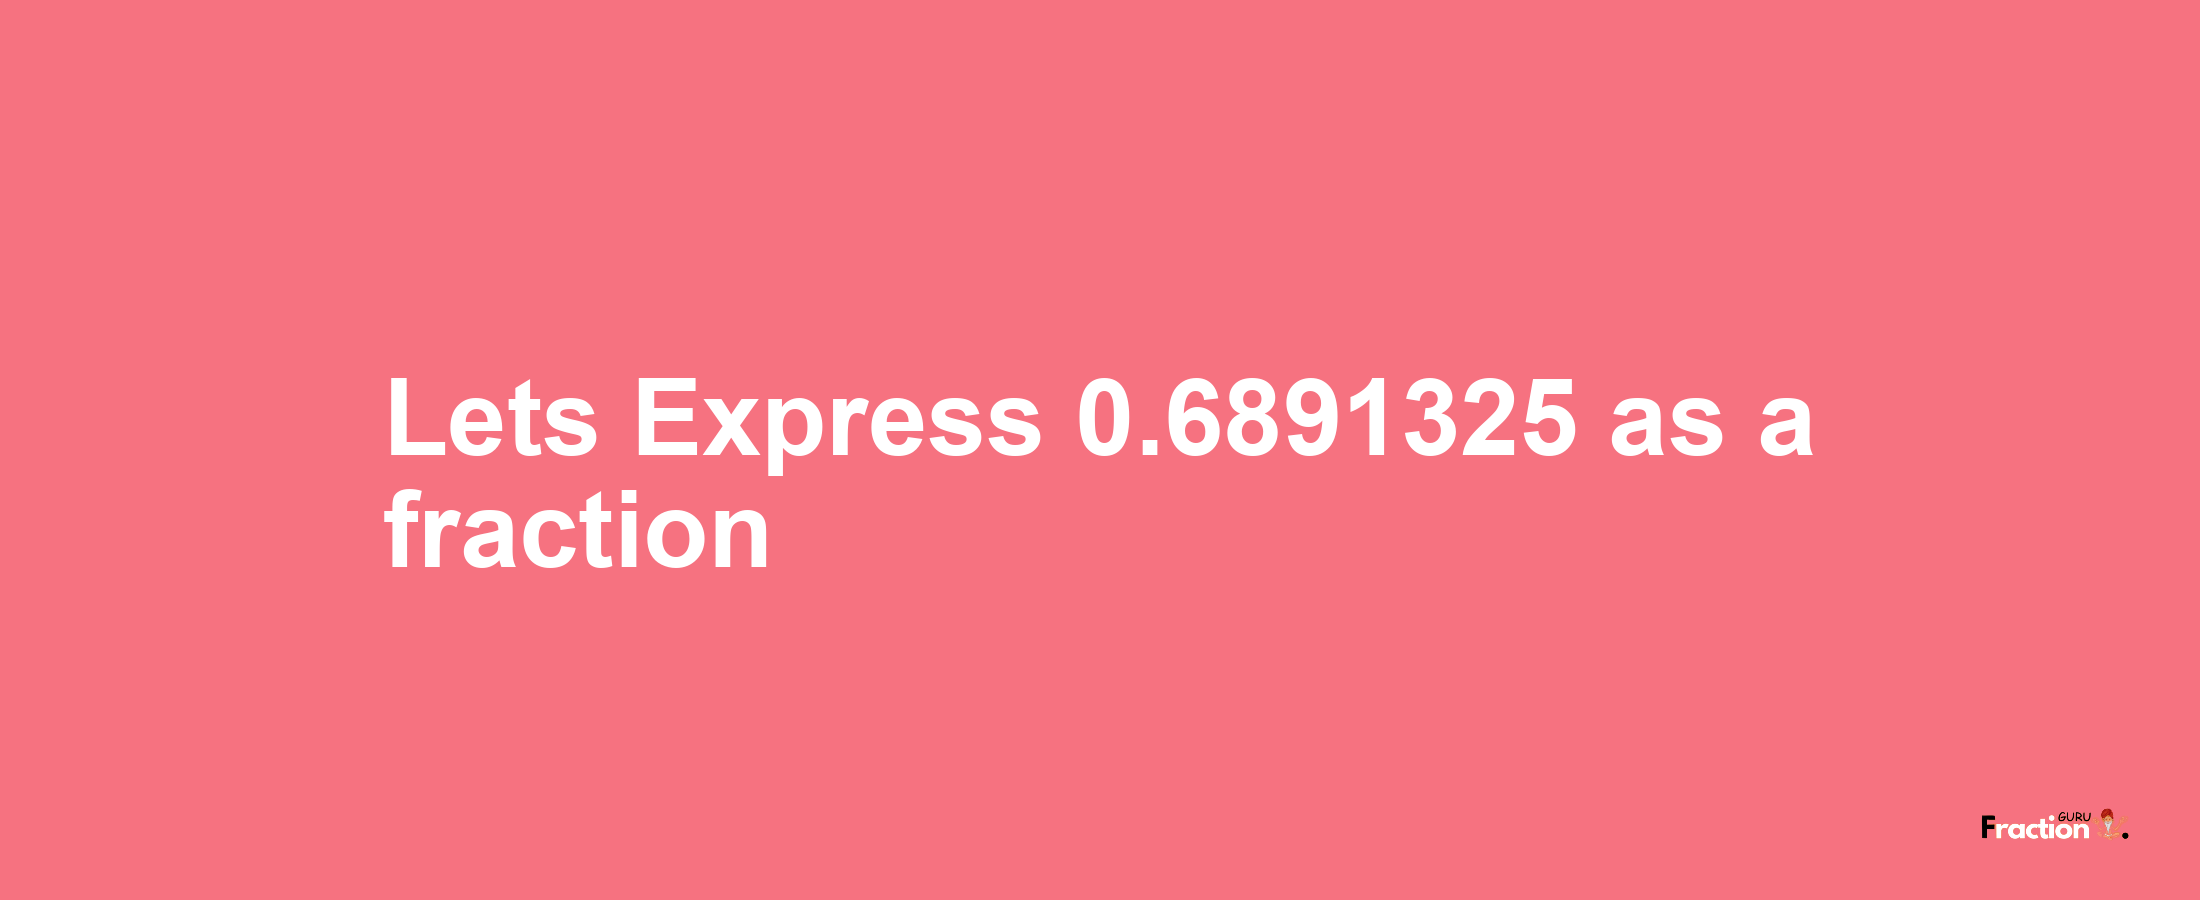 Lets Express 0.6891325 as afraction